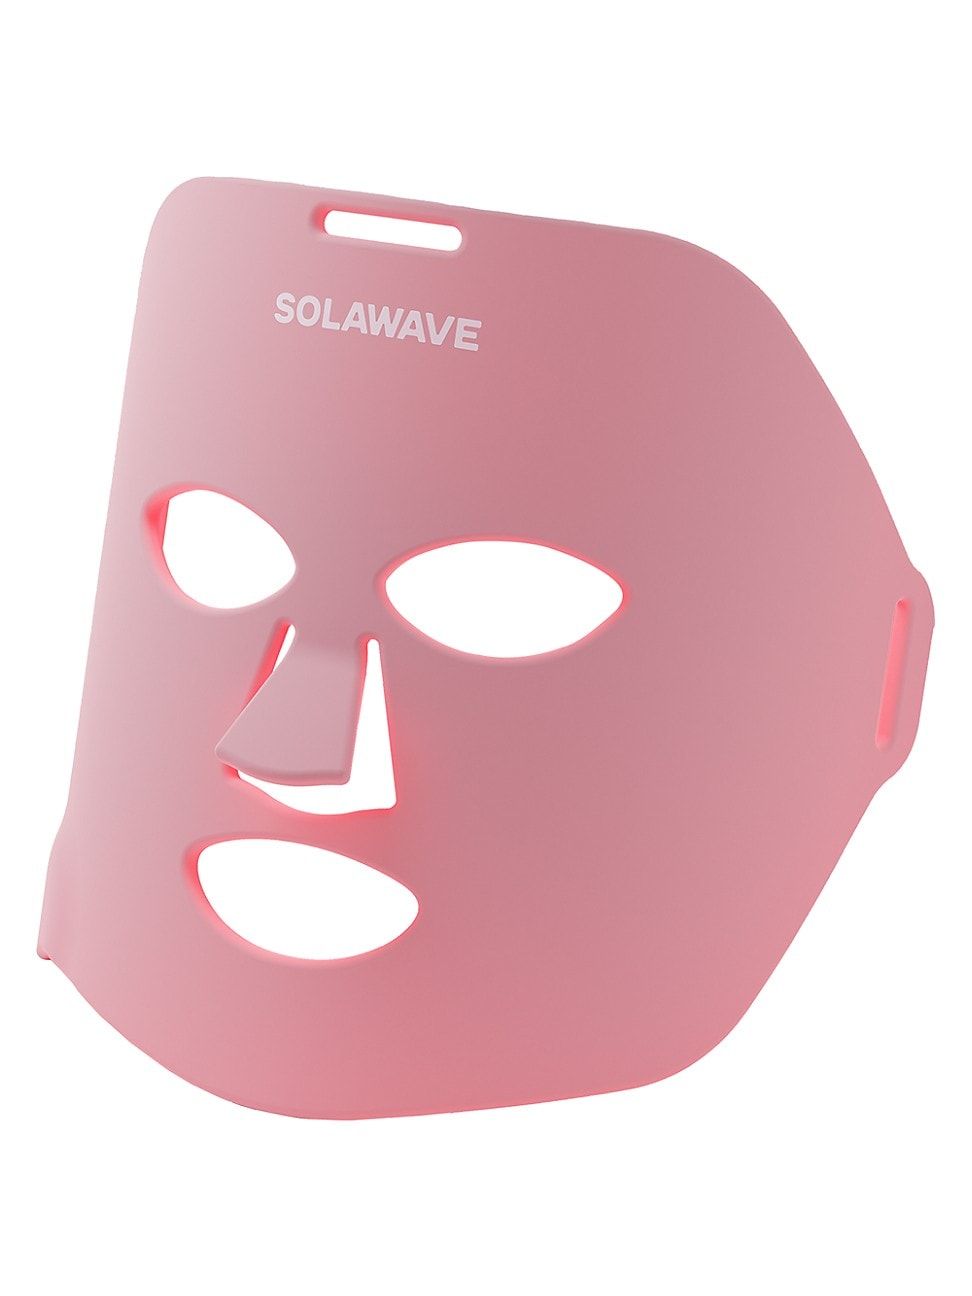 Women's Solawave Full Face Wrinkle & Acne Clearing Light Therapy Mask | Saks Fifth Avenue